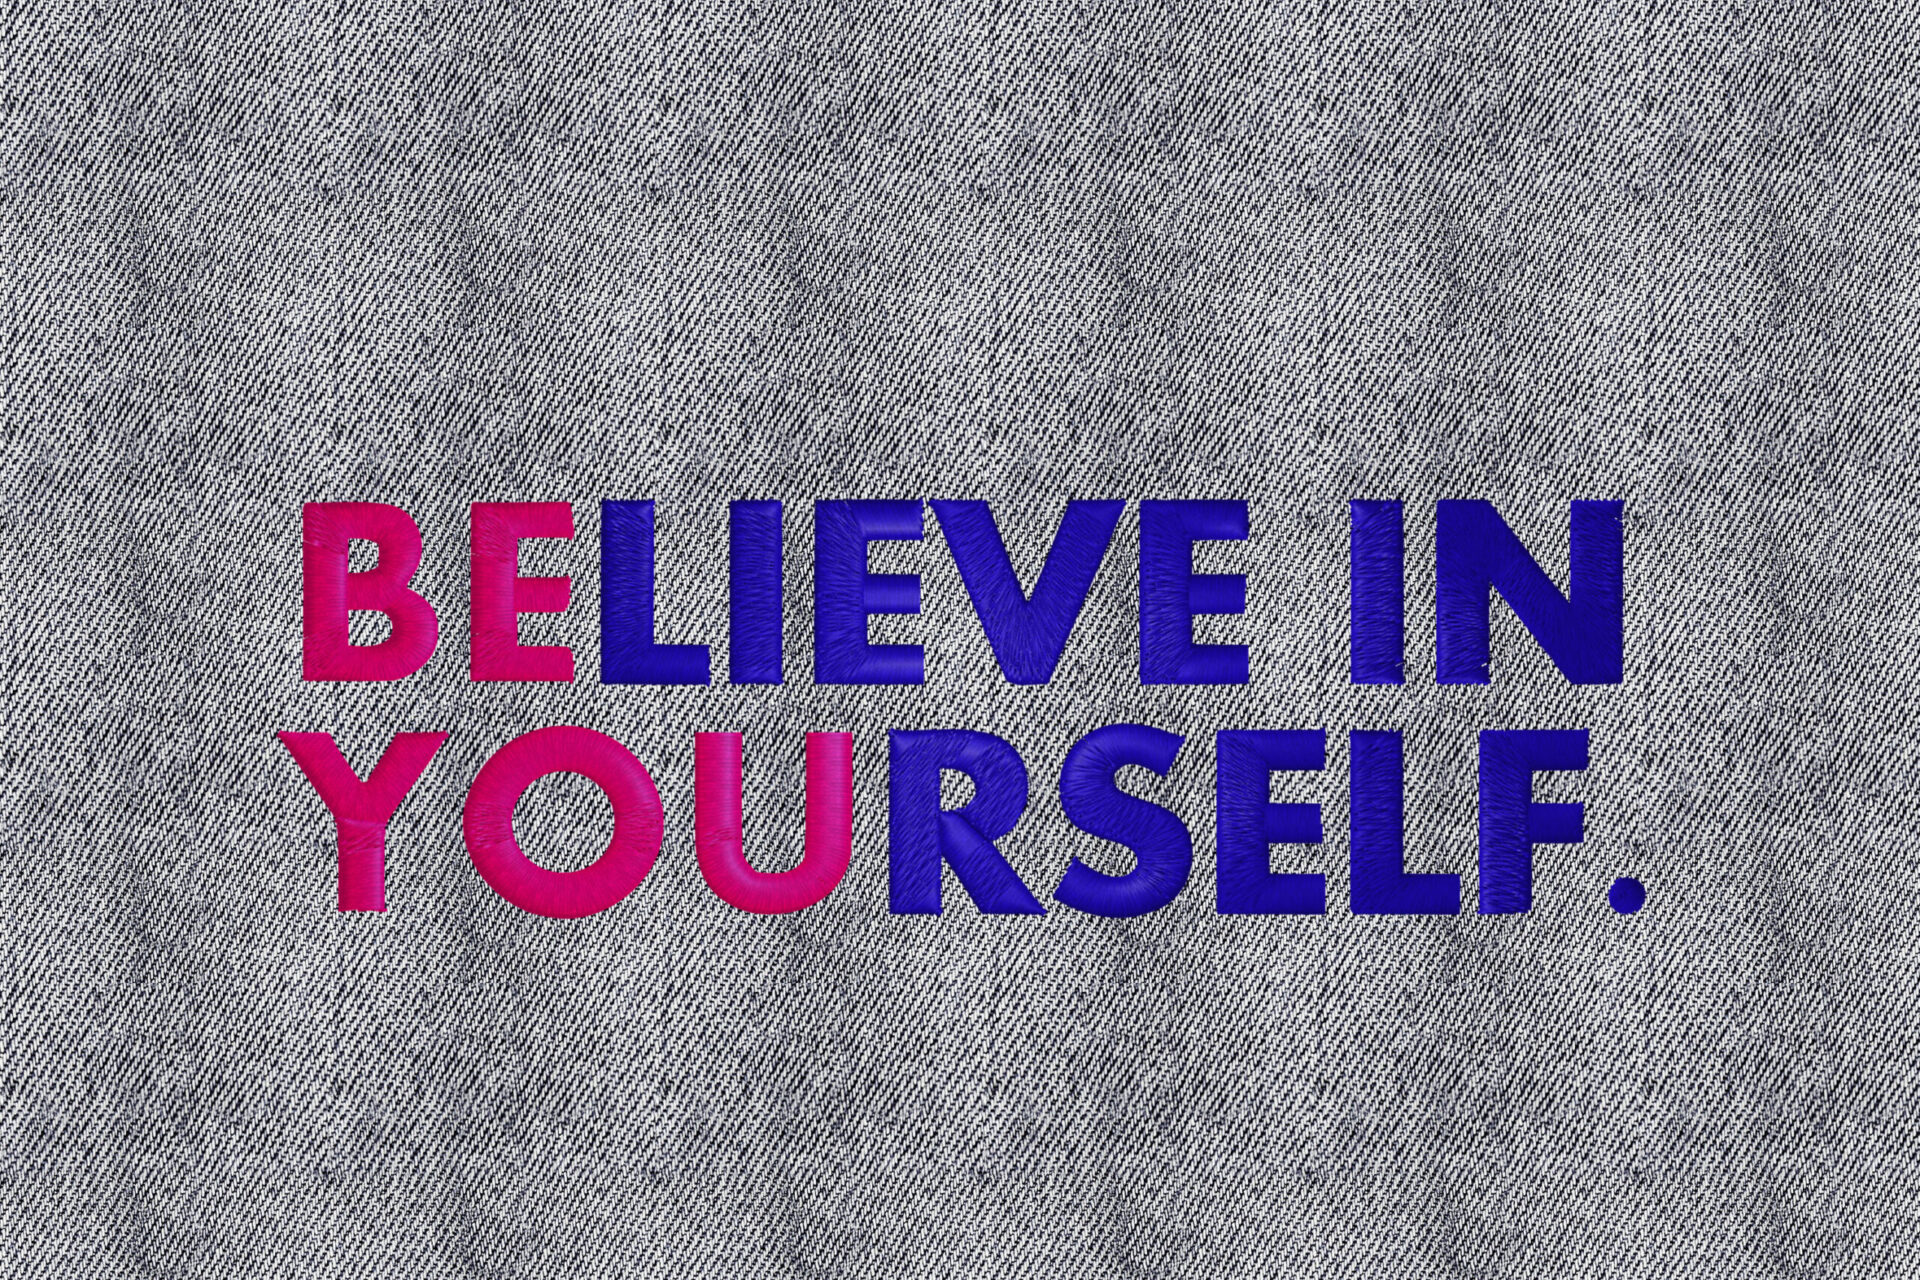 Be You Believe in Yourself Machine embroidery